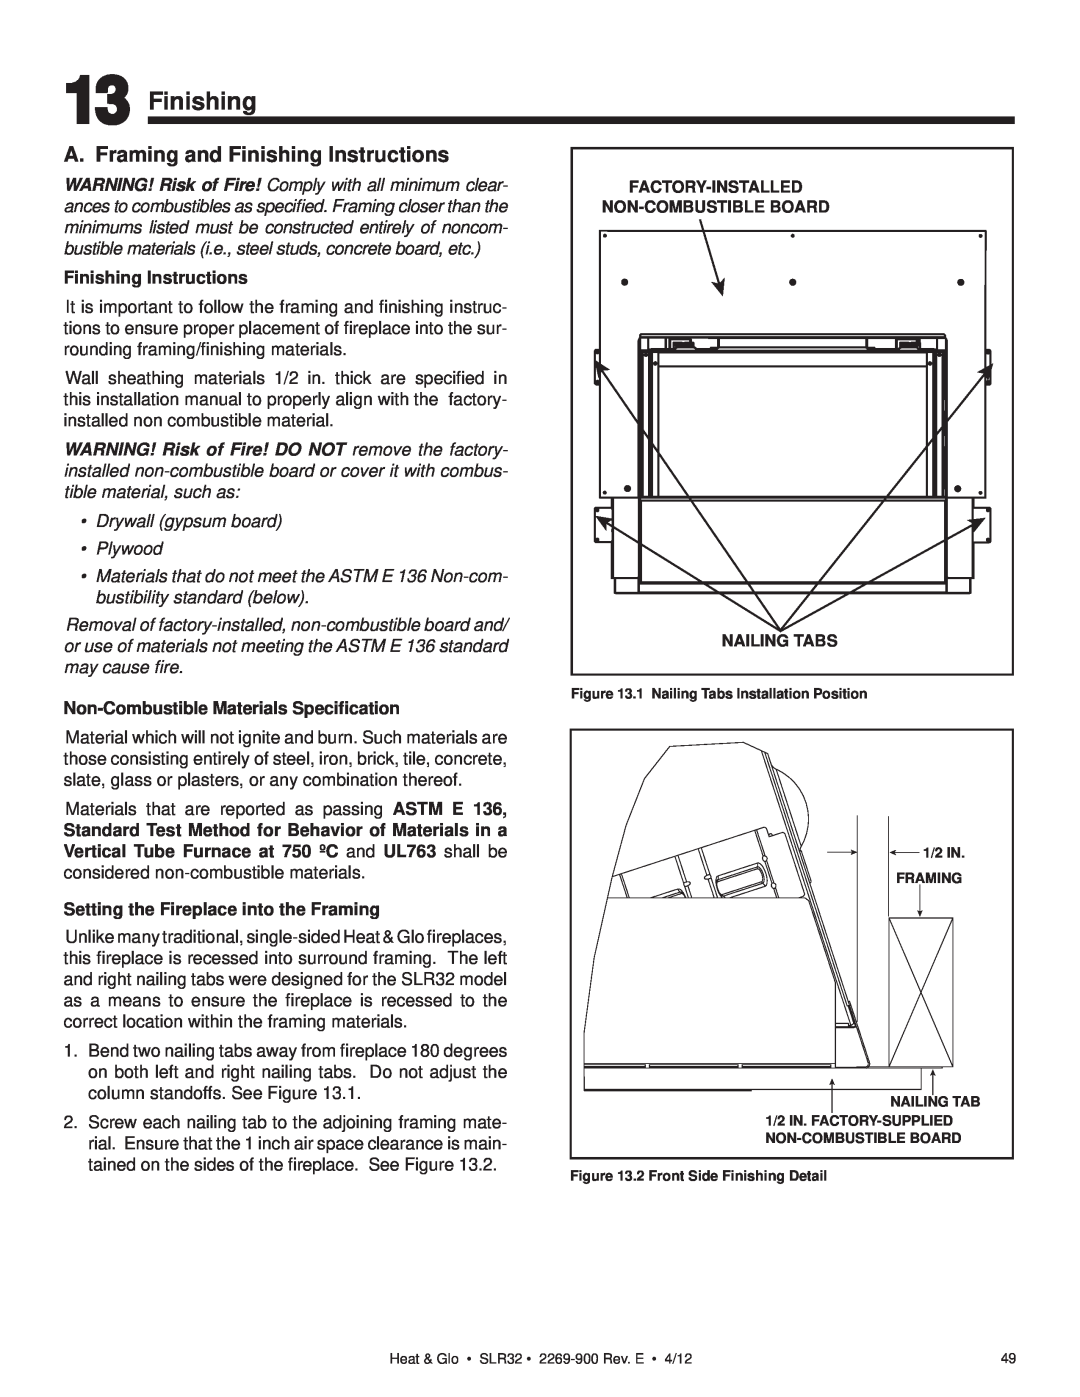 Heat & Glo LifeStyle SLR32 owner manual A. Framing and Finishing Instructions, •Drywall gypsum board •Plywood 